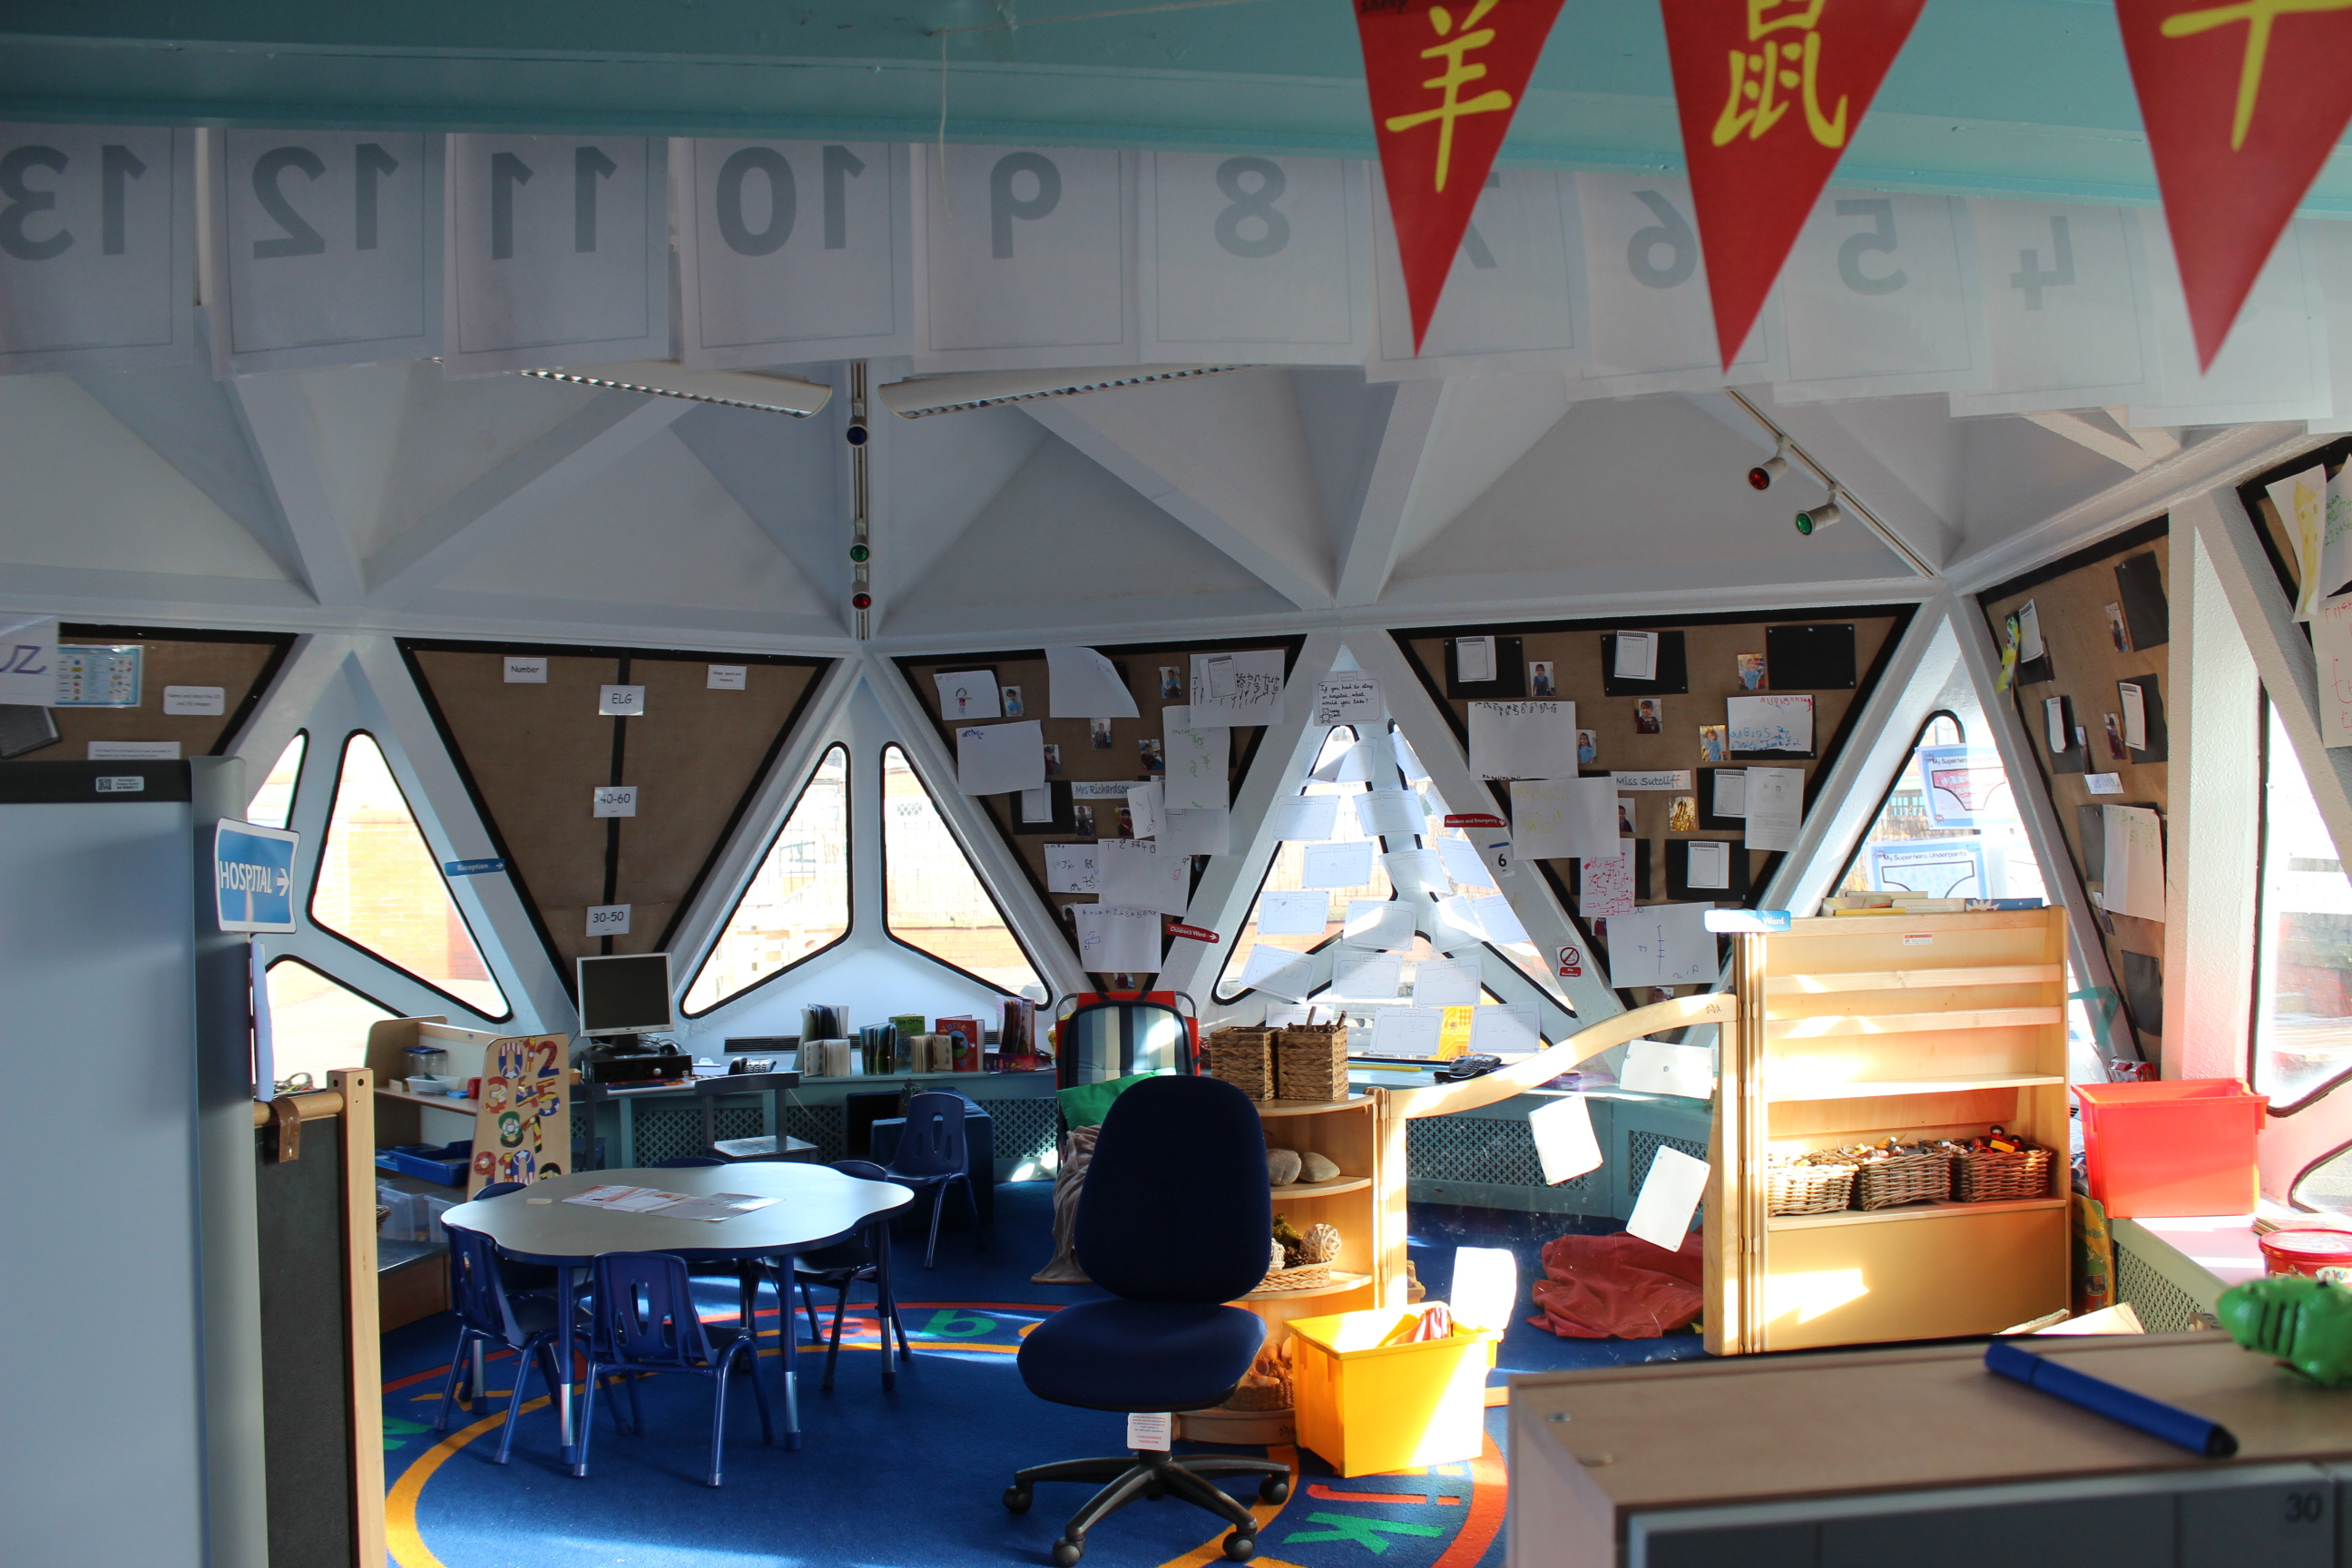 Photo of a classroom inside a domed building with triangular windows, walls and roof panels